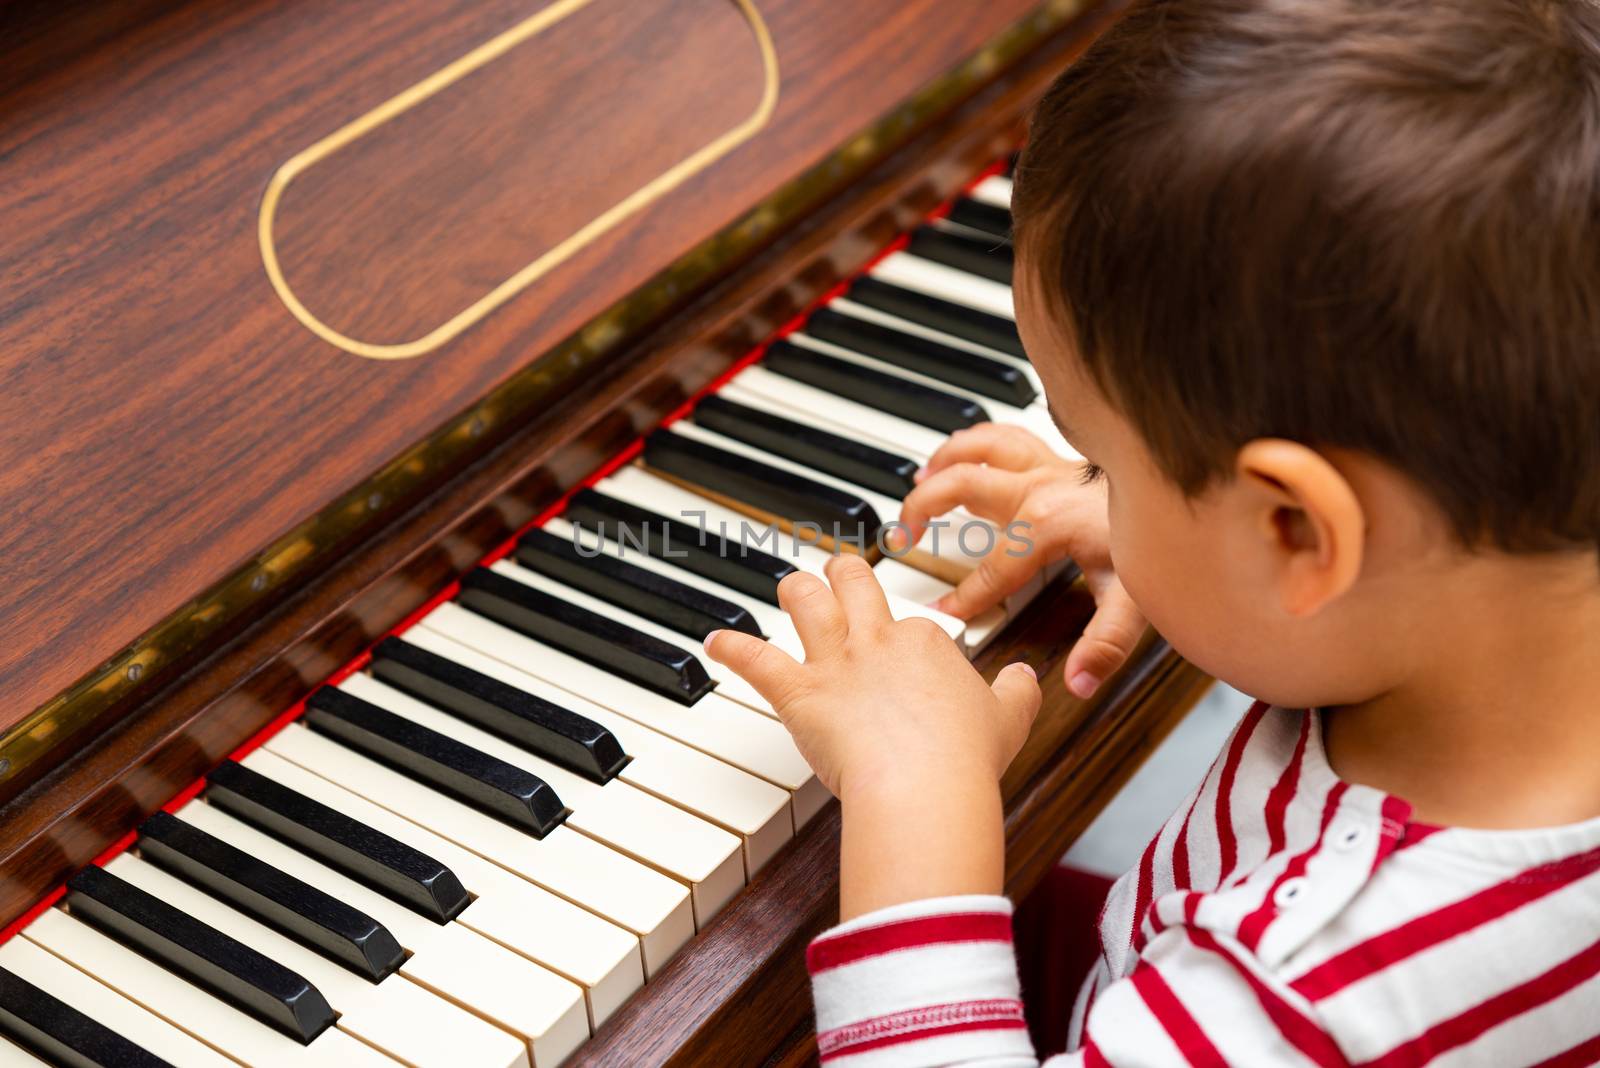 Litlle boy playing the piano, toddler learning music at home